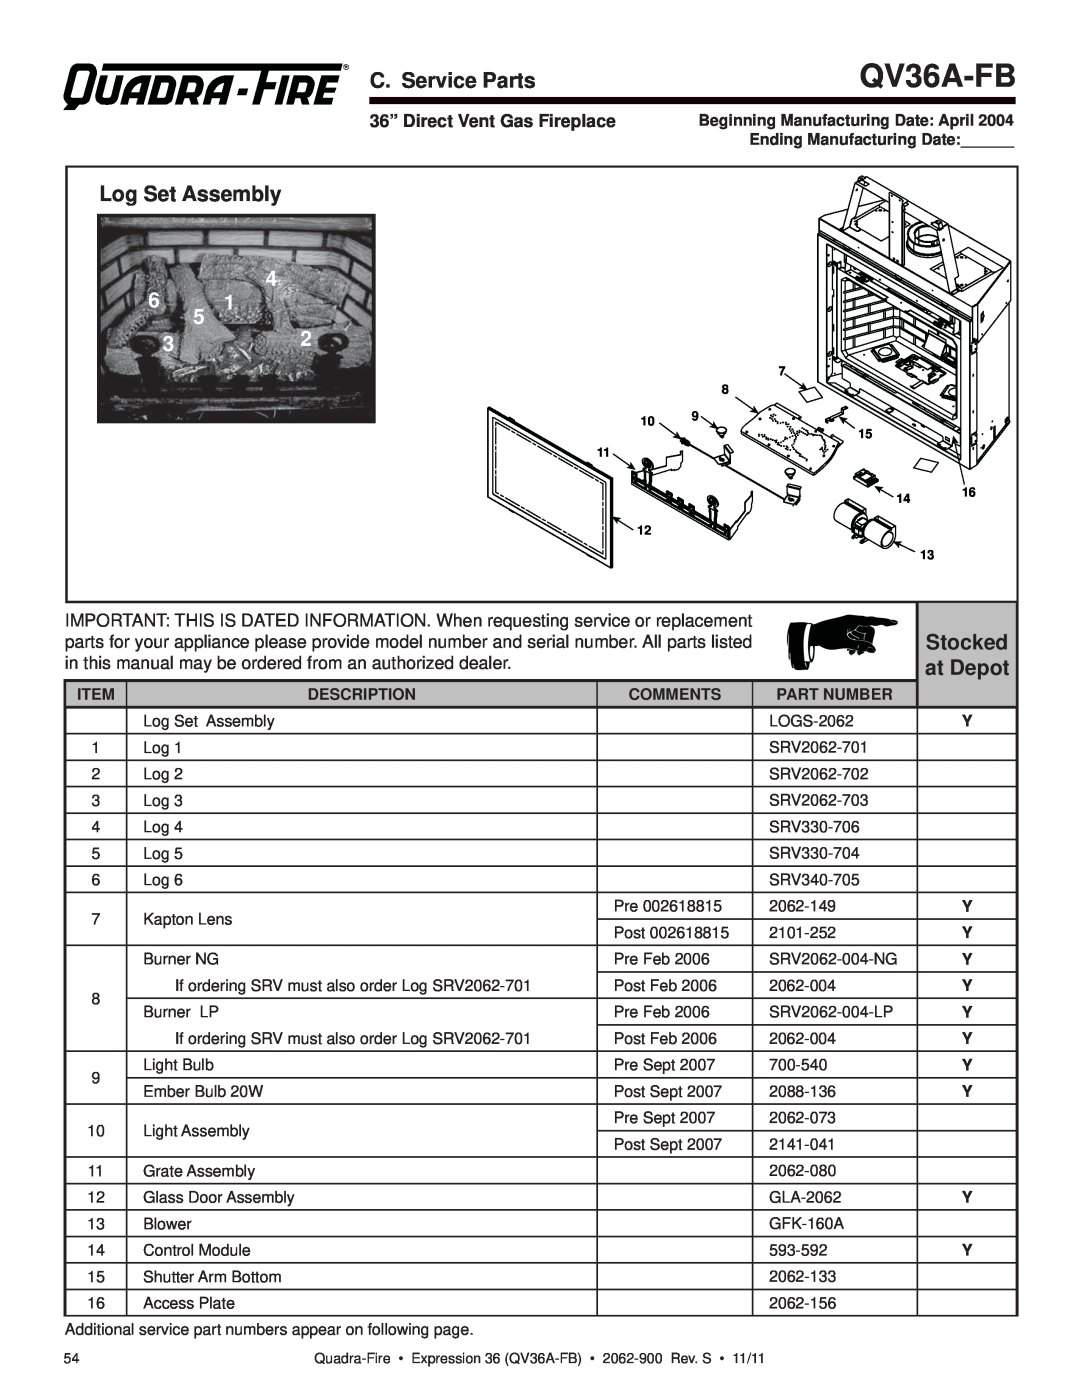 Quadra-Fire QV36A-FB owner manual C. Service Parts, Log Set Assembly, at Depot, Stocked, 36” Direct Vent Gas Fireplace 